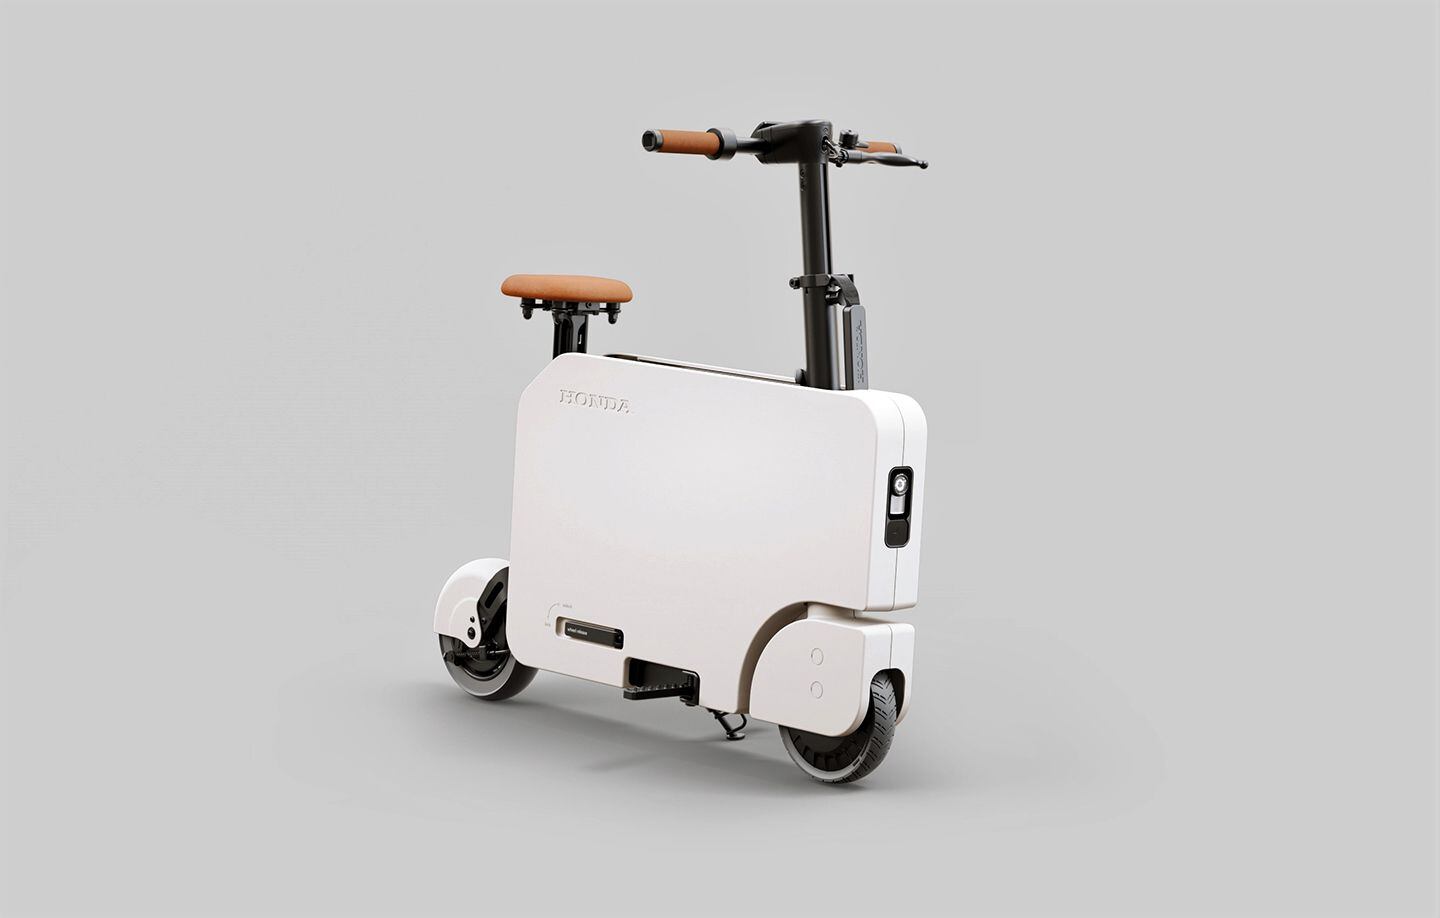 Honda’s Motocompacto will be sold at the company’s car dealerships for $995.